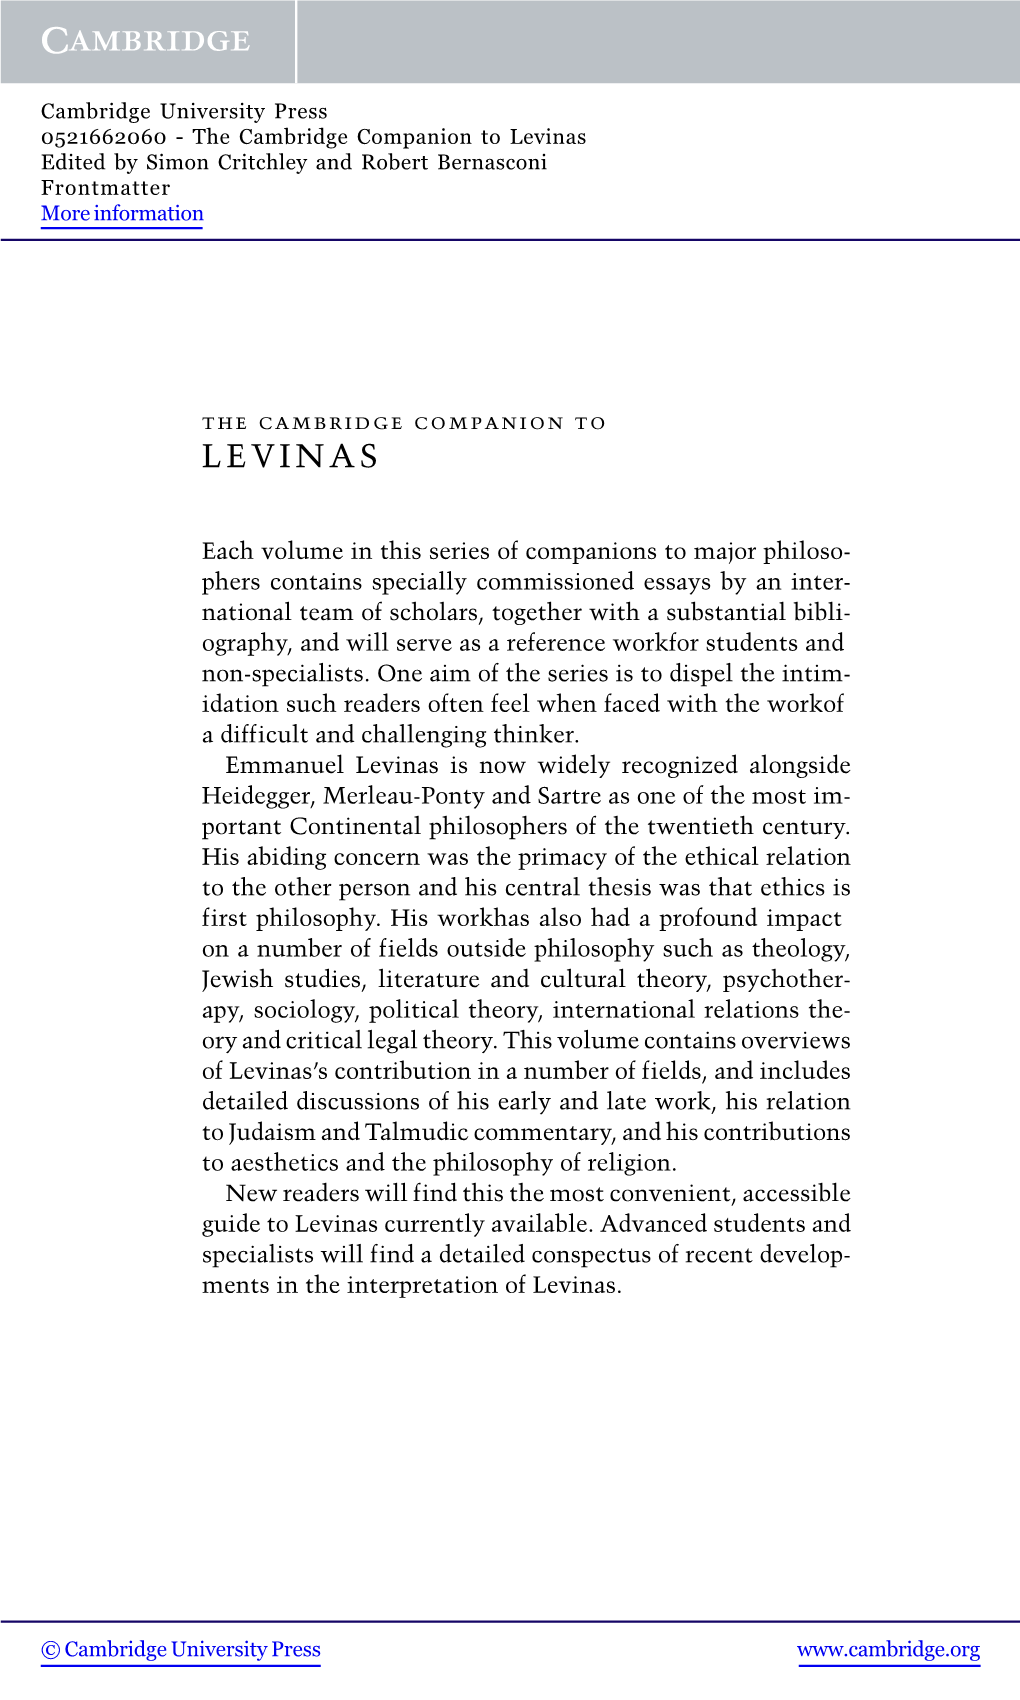 Levinas Edited by Simon Critchley and Robert Bernasconi Frontmatter More Information